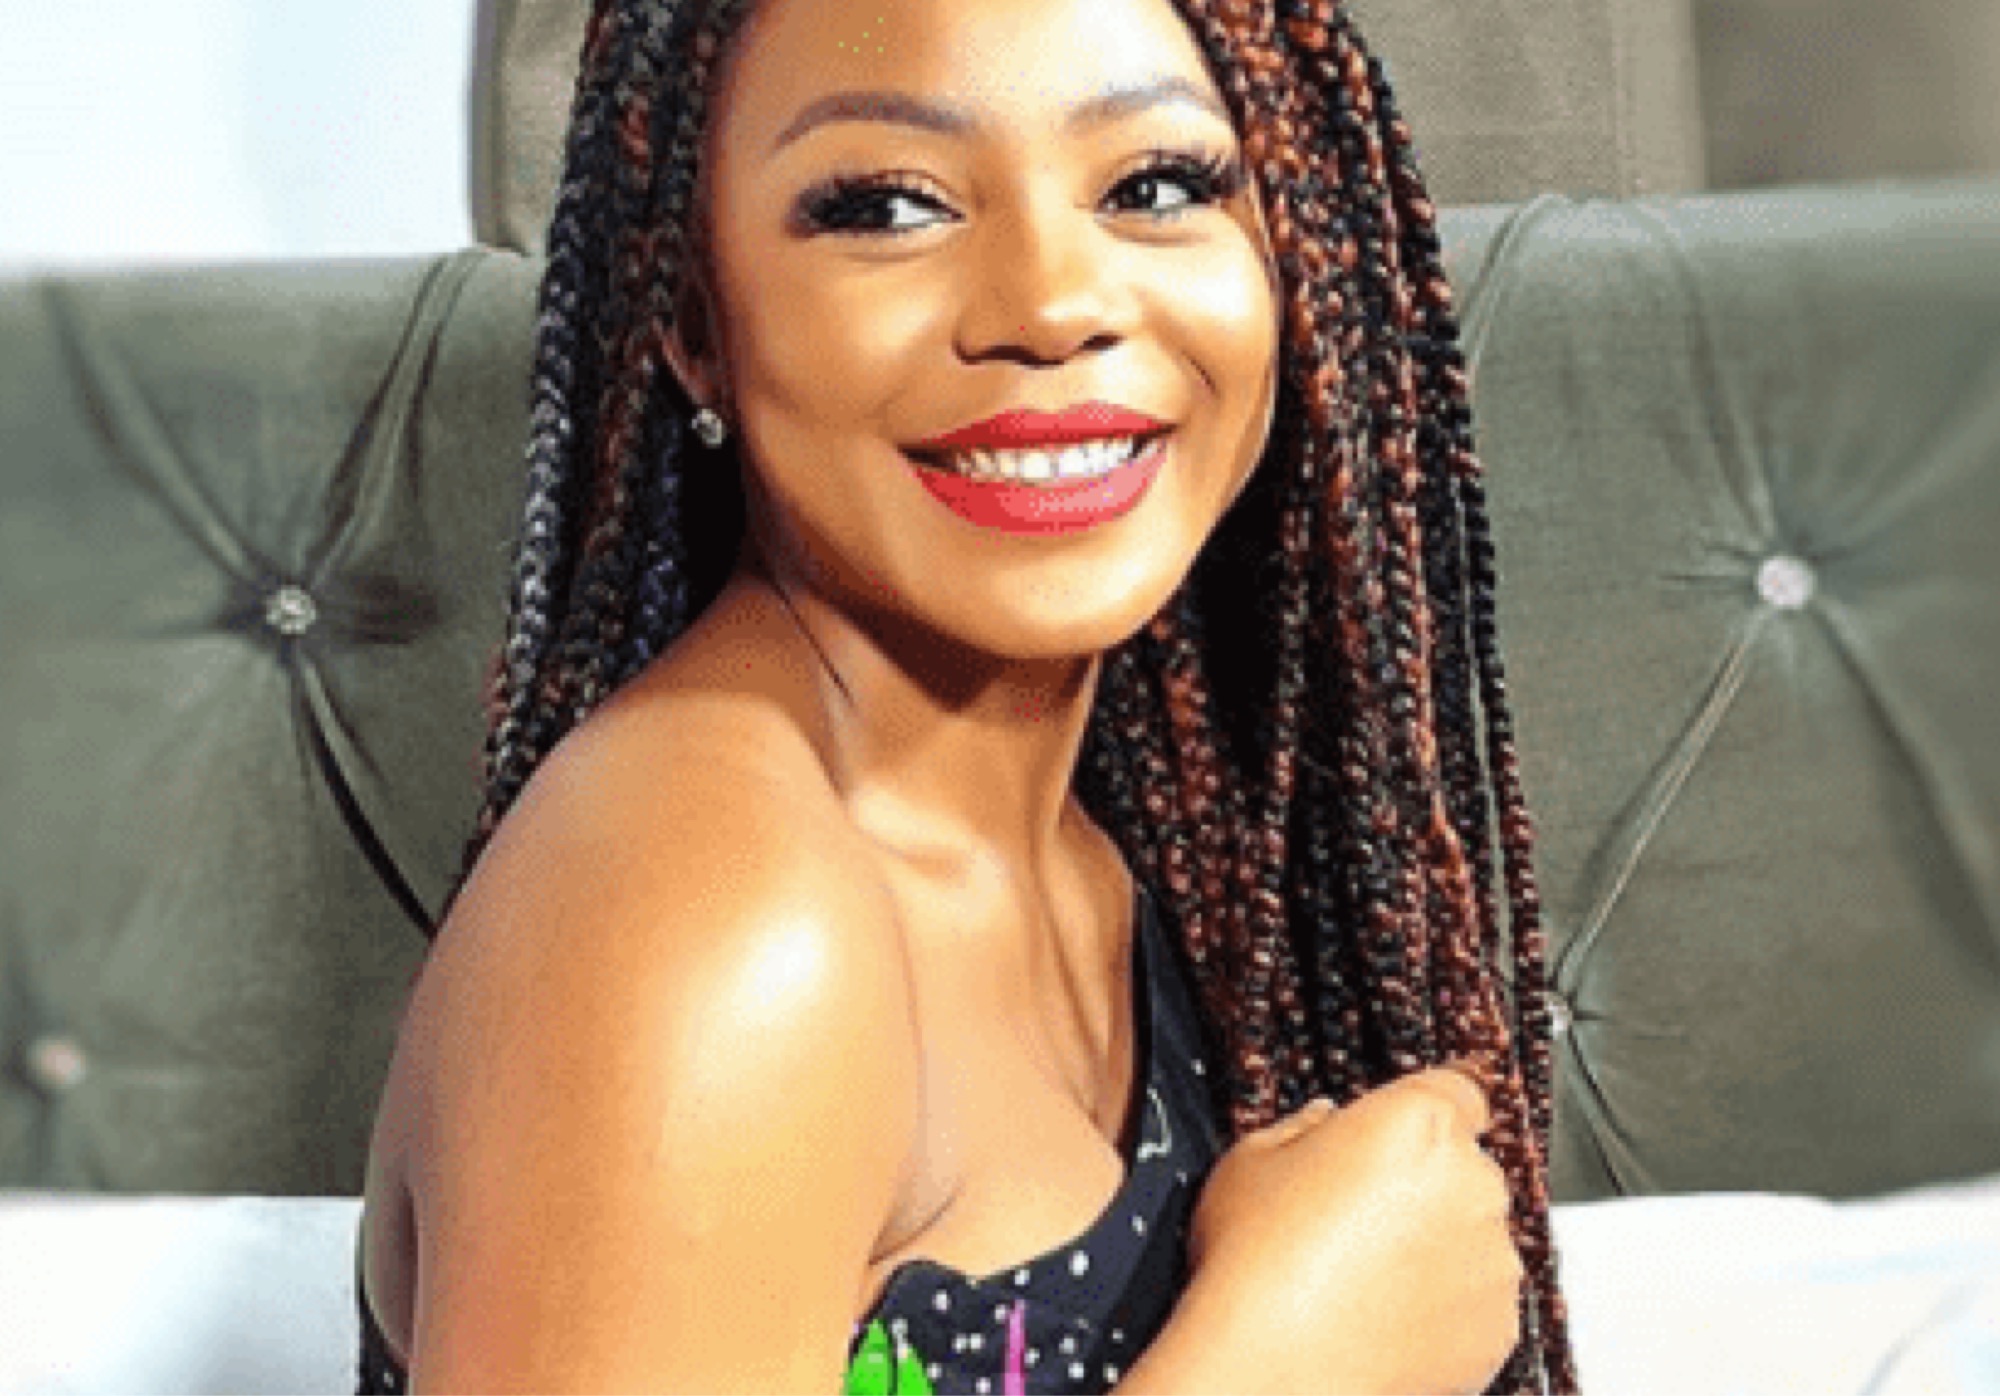 'Sometimes I Feel Neglected By God' - BBnaija's Ifu Ennada Cries Out